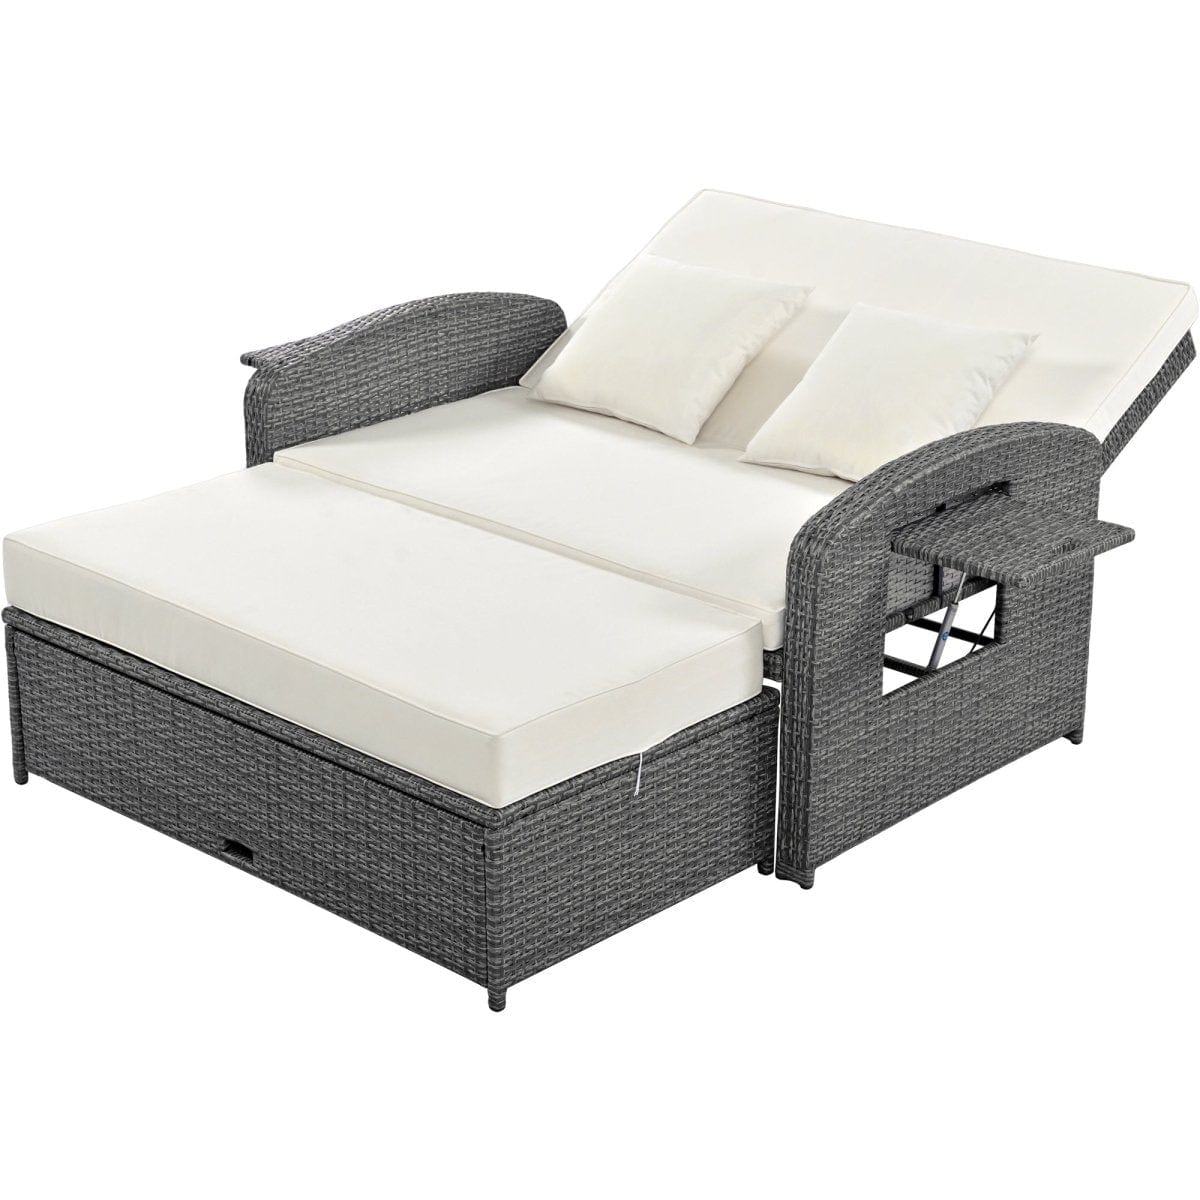 2 Person Outdoor Daybed with Built-in Tables8Topmaxx